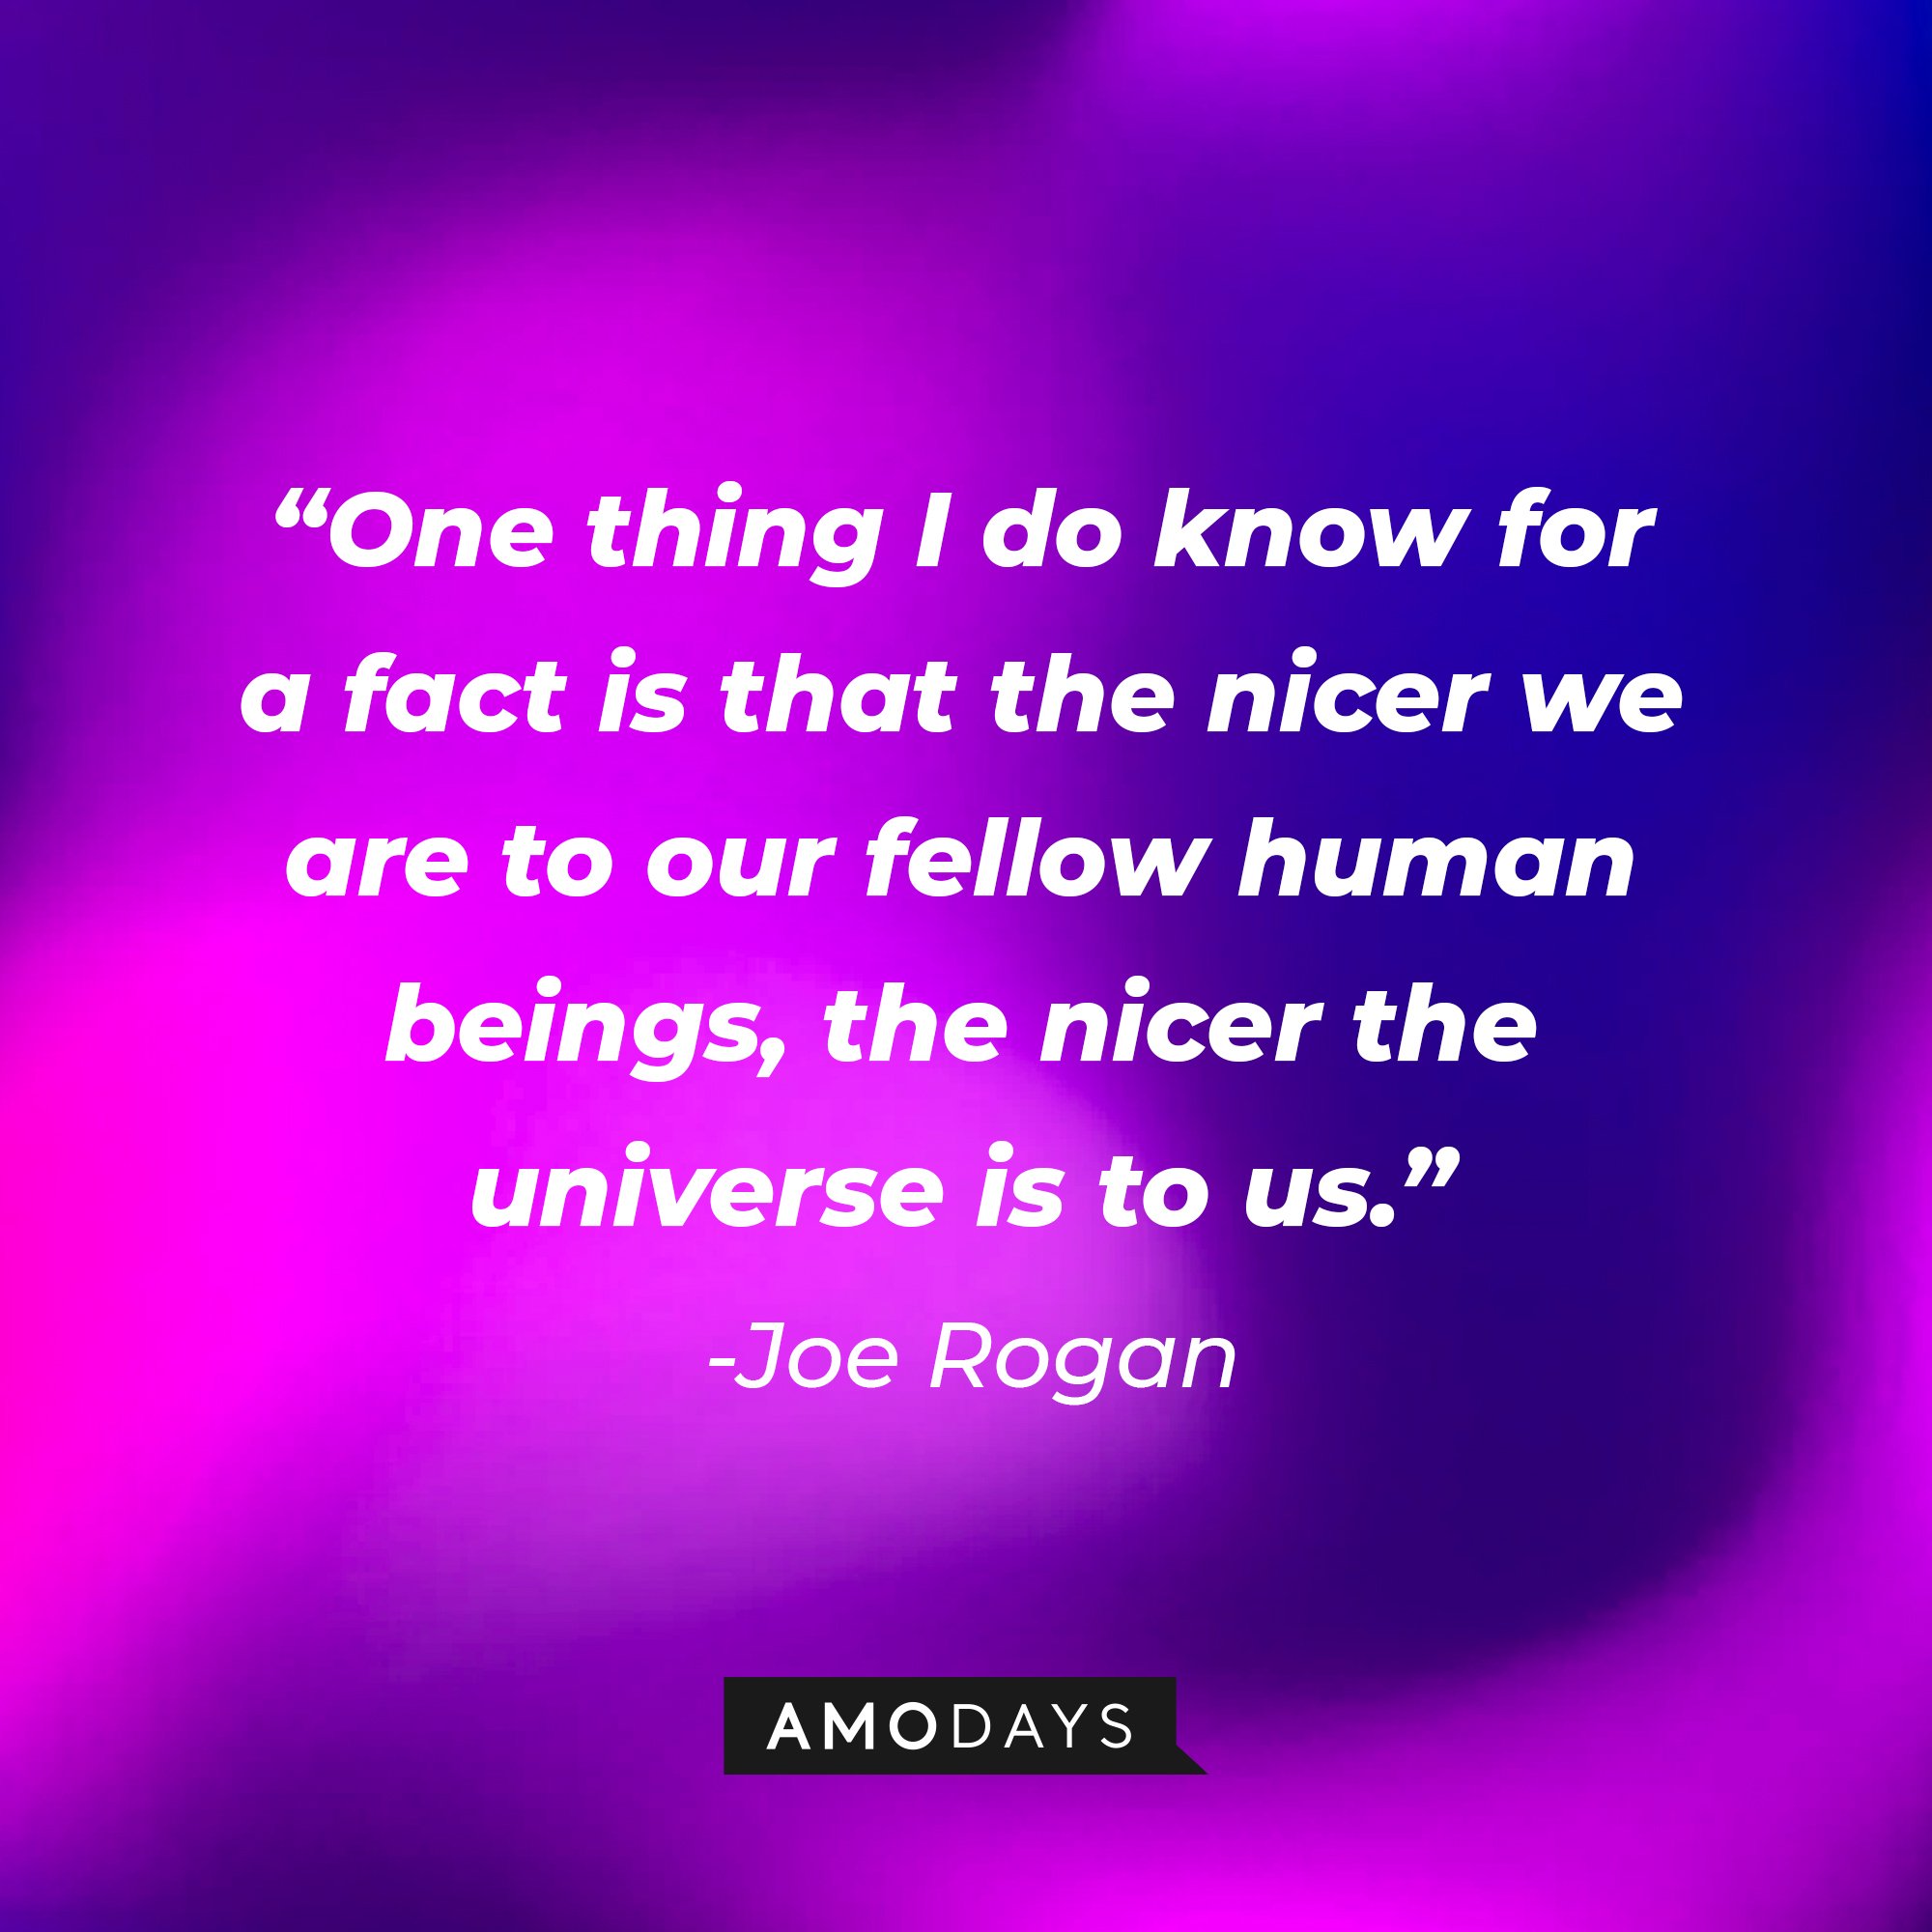  Joe Rogan's quote: "One thing I do know for a fact is that the nicer we are to our fellow human beings, the nicer the universe is to us." | Image: AmoDays